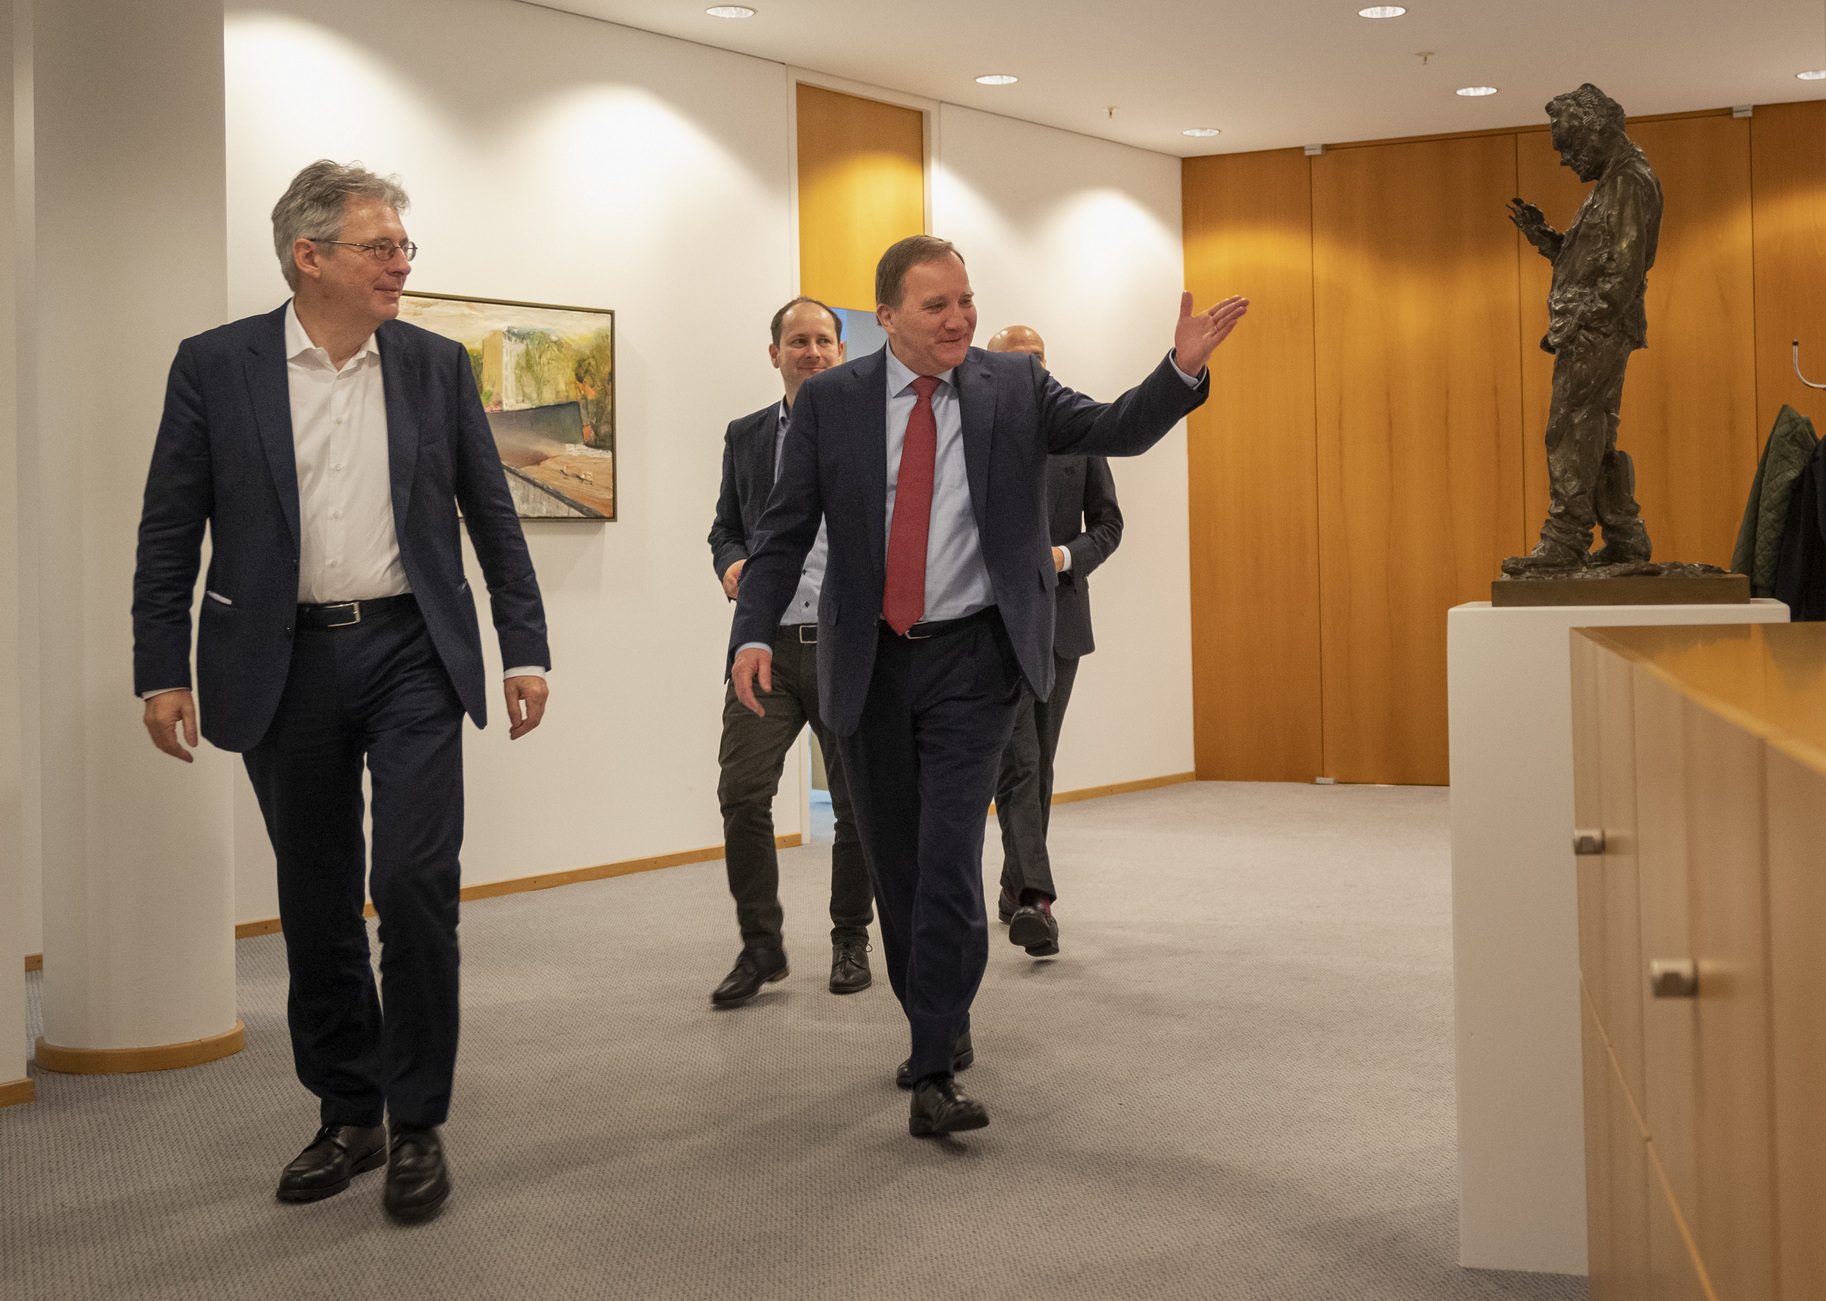 PES Secretary General Achim Post (left) and PES President Stefan Löfven at the Willy-Brandt-Haus, Berlin